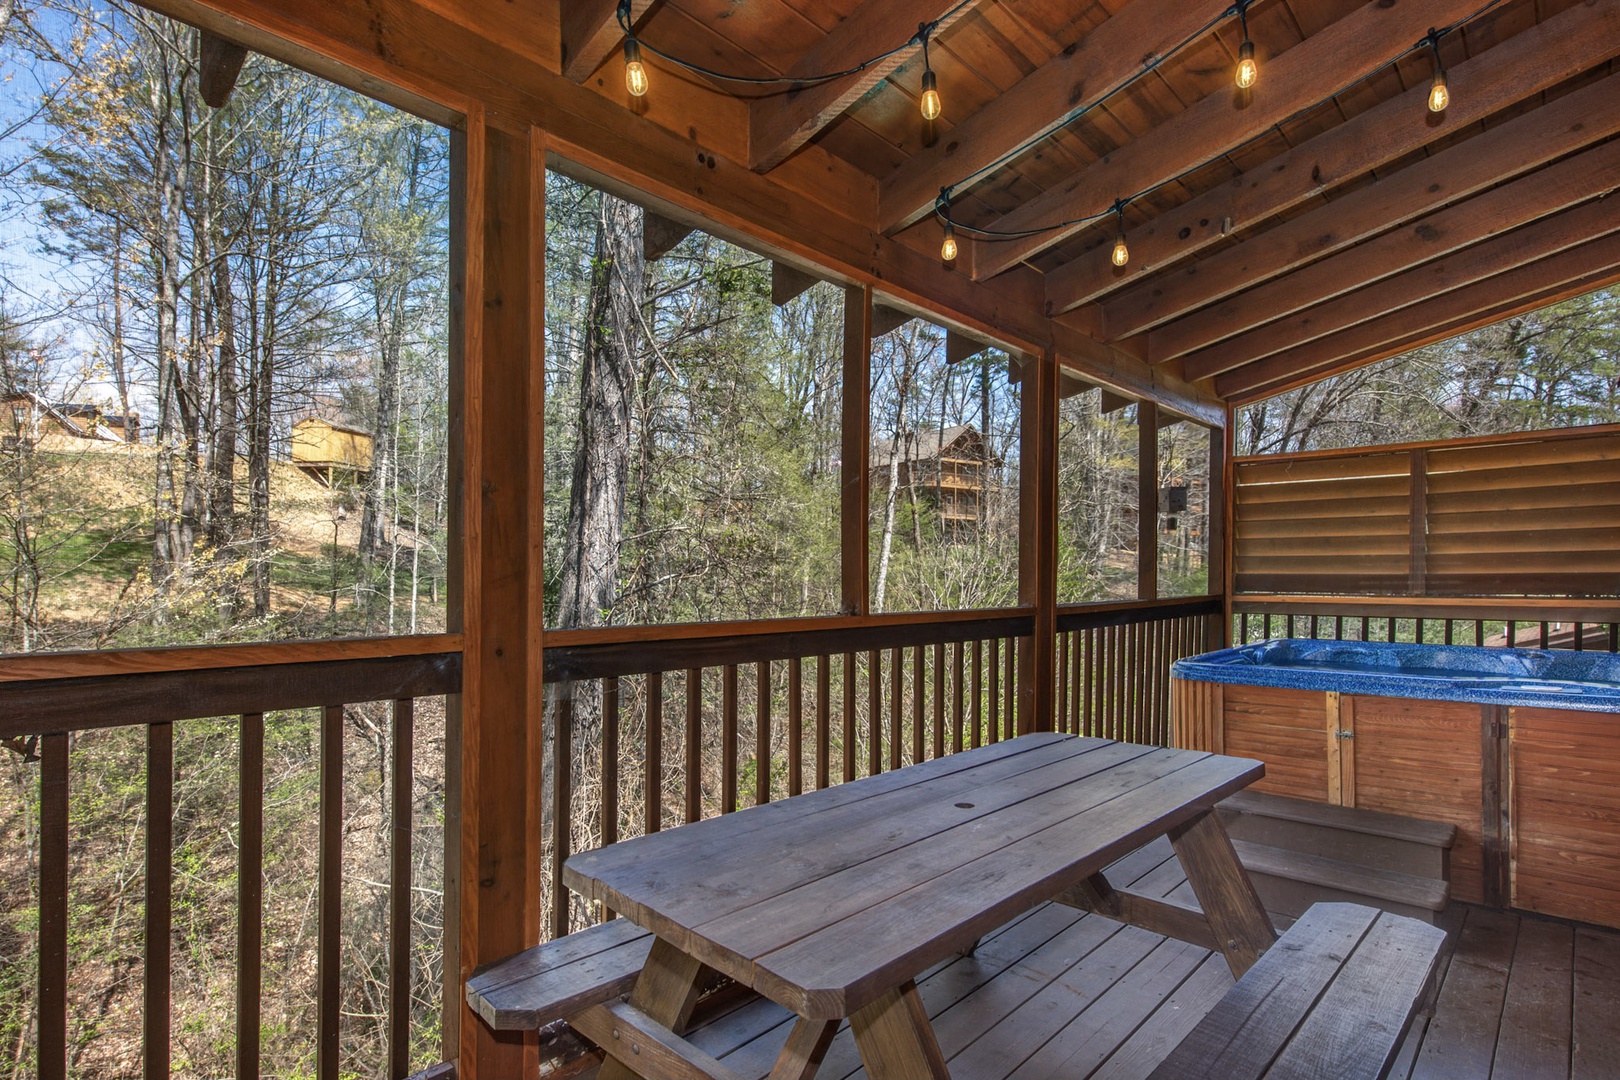 Outdoor deck with picnic table area next to hot tub